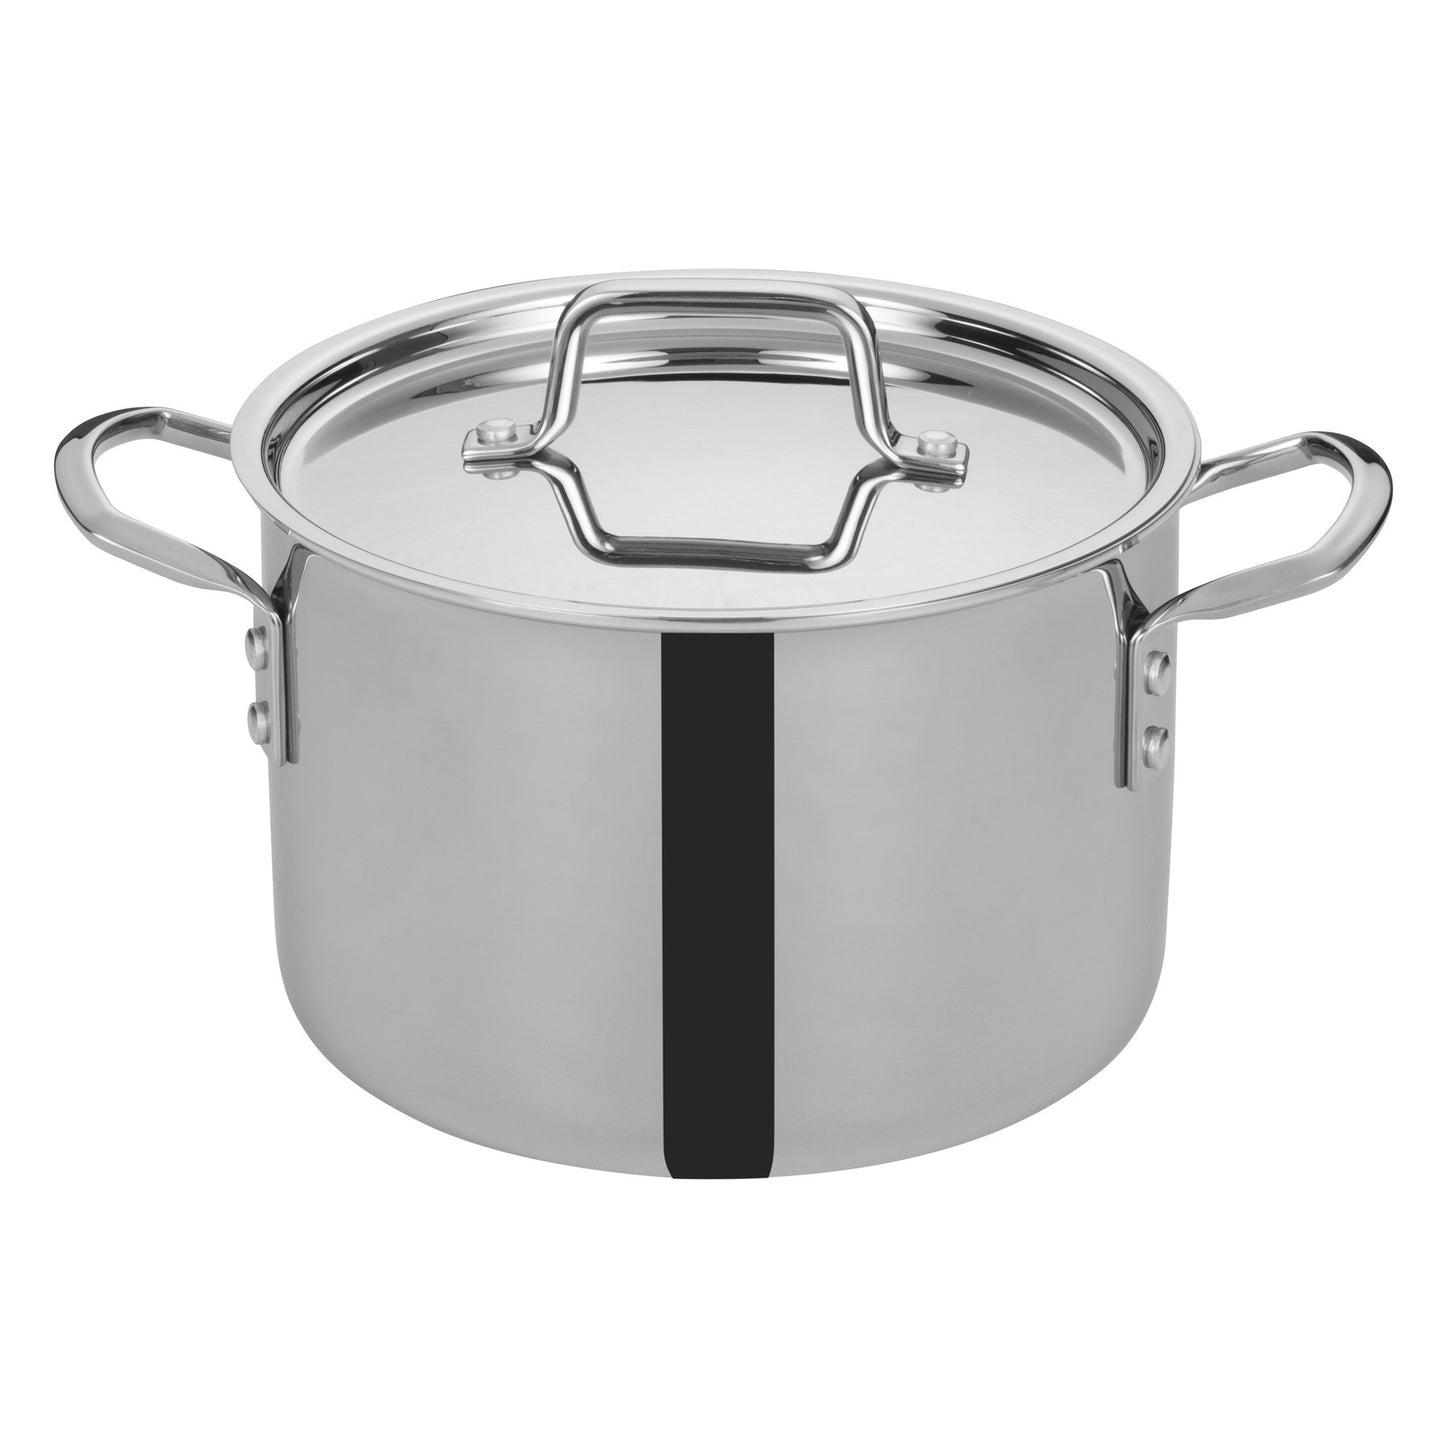 Tri-Gen Tri-Ply Stainless Steel Stock Pot with Cover - 6 Quart